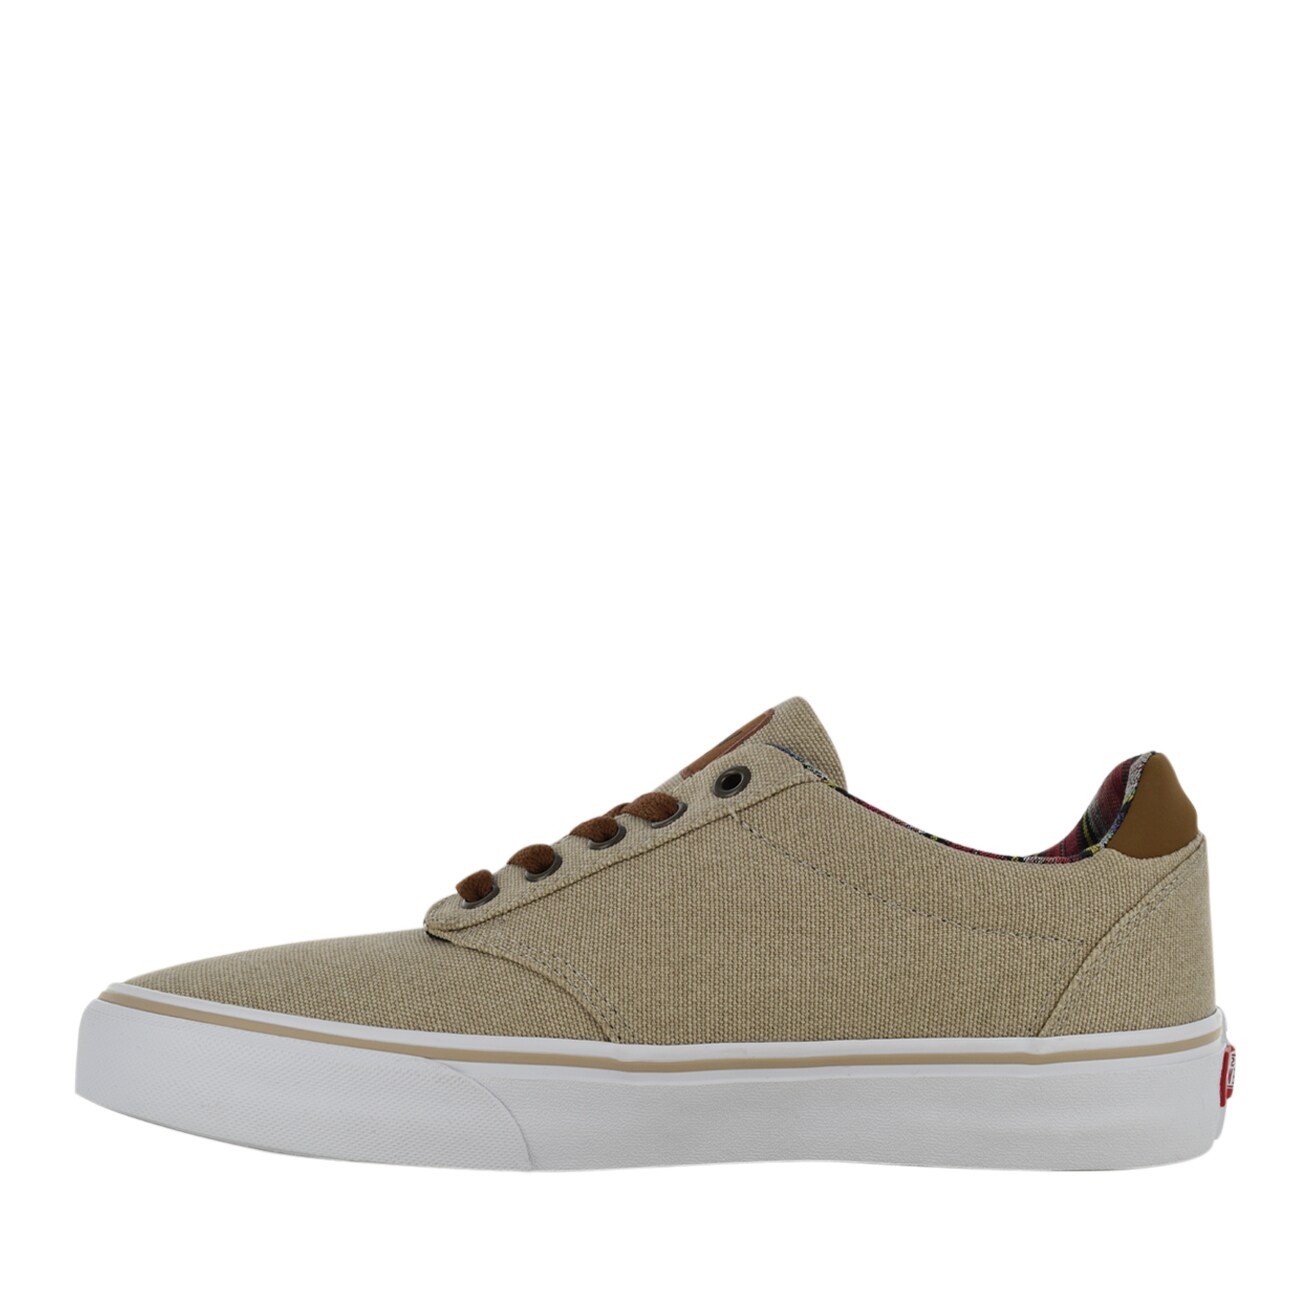 vans atwood deluxe ortholite